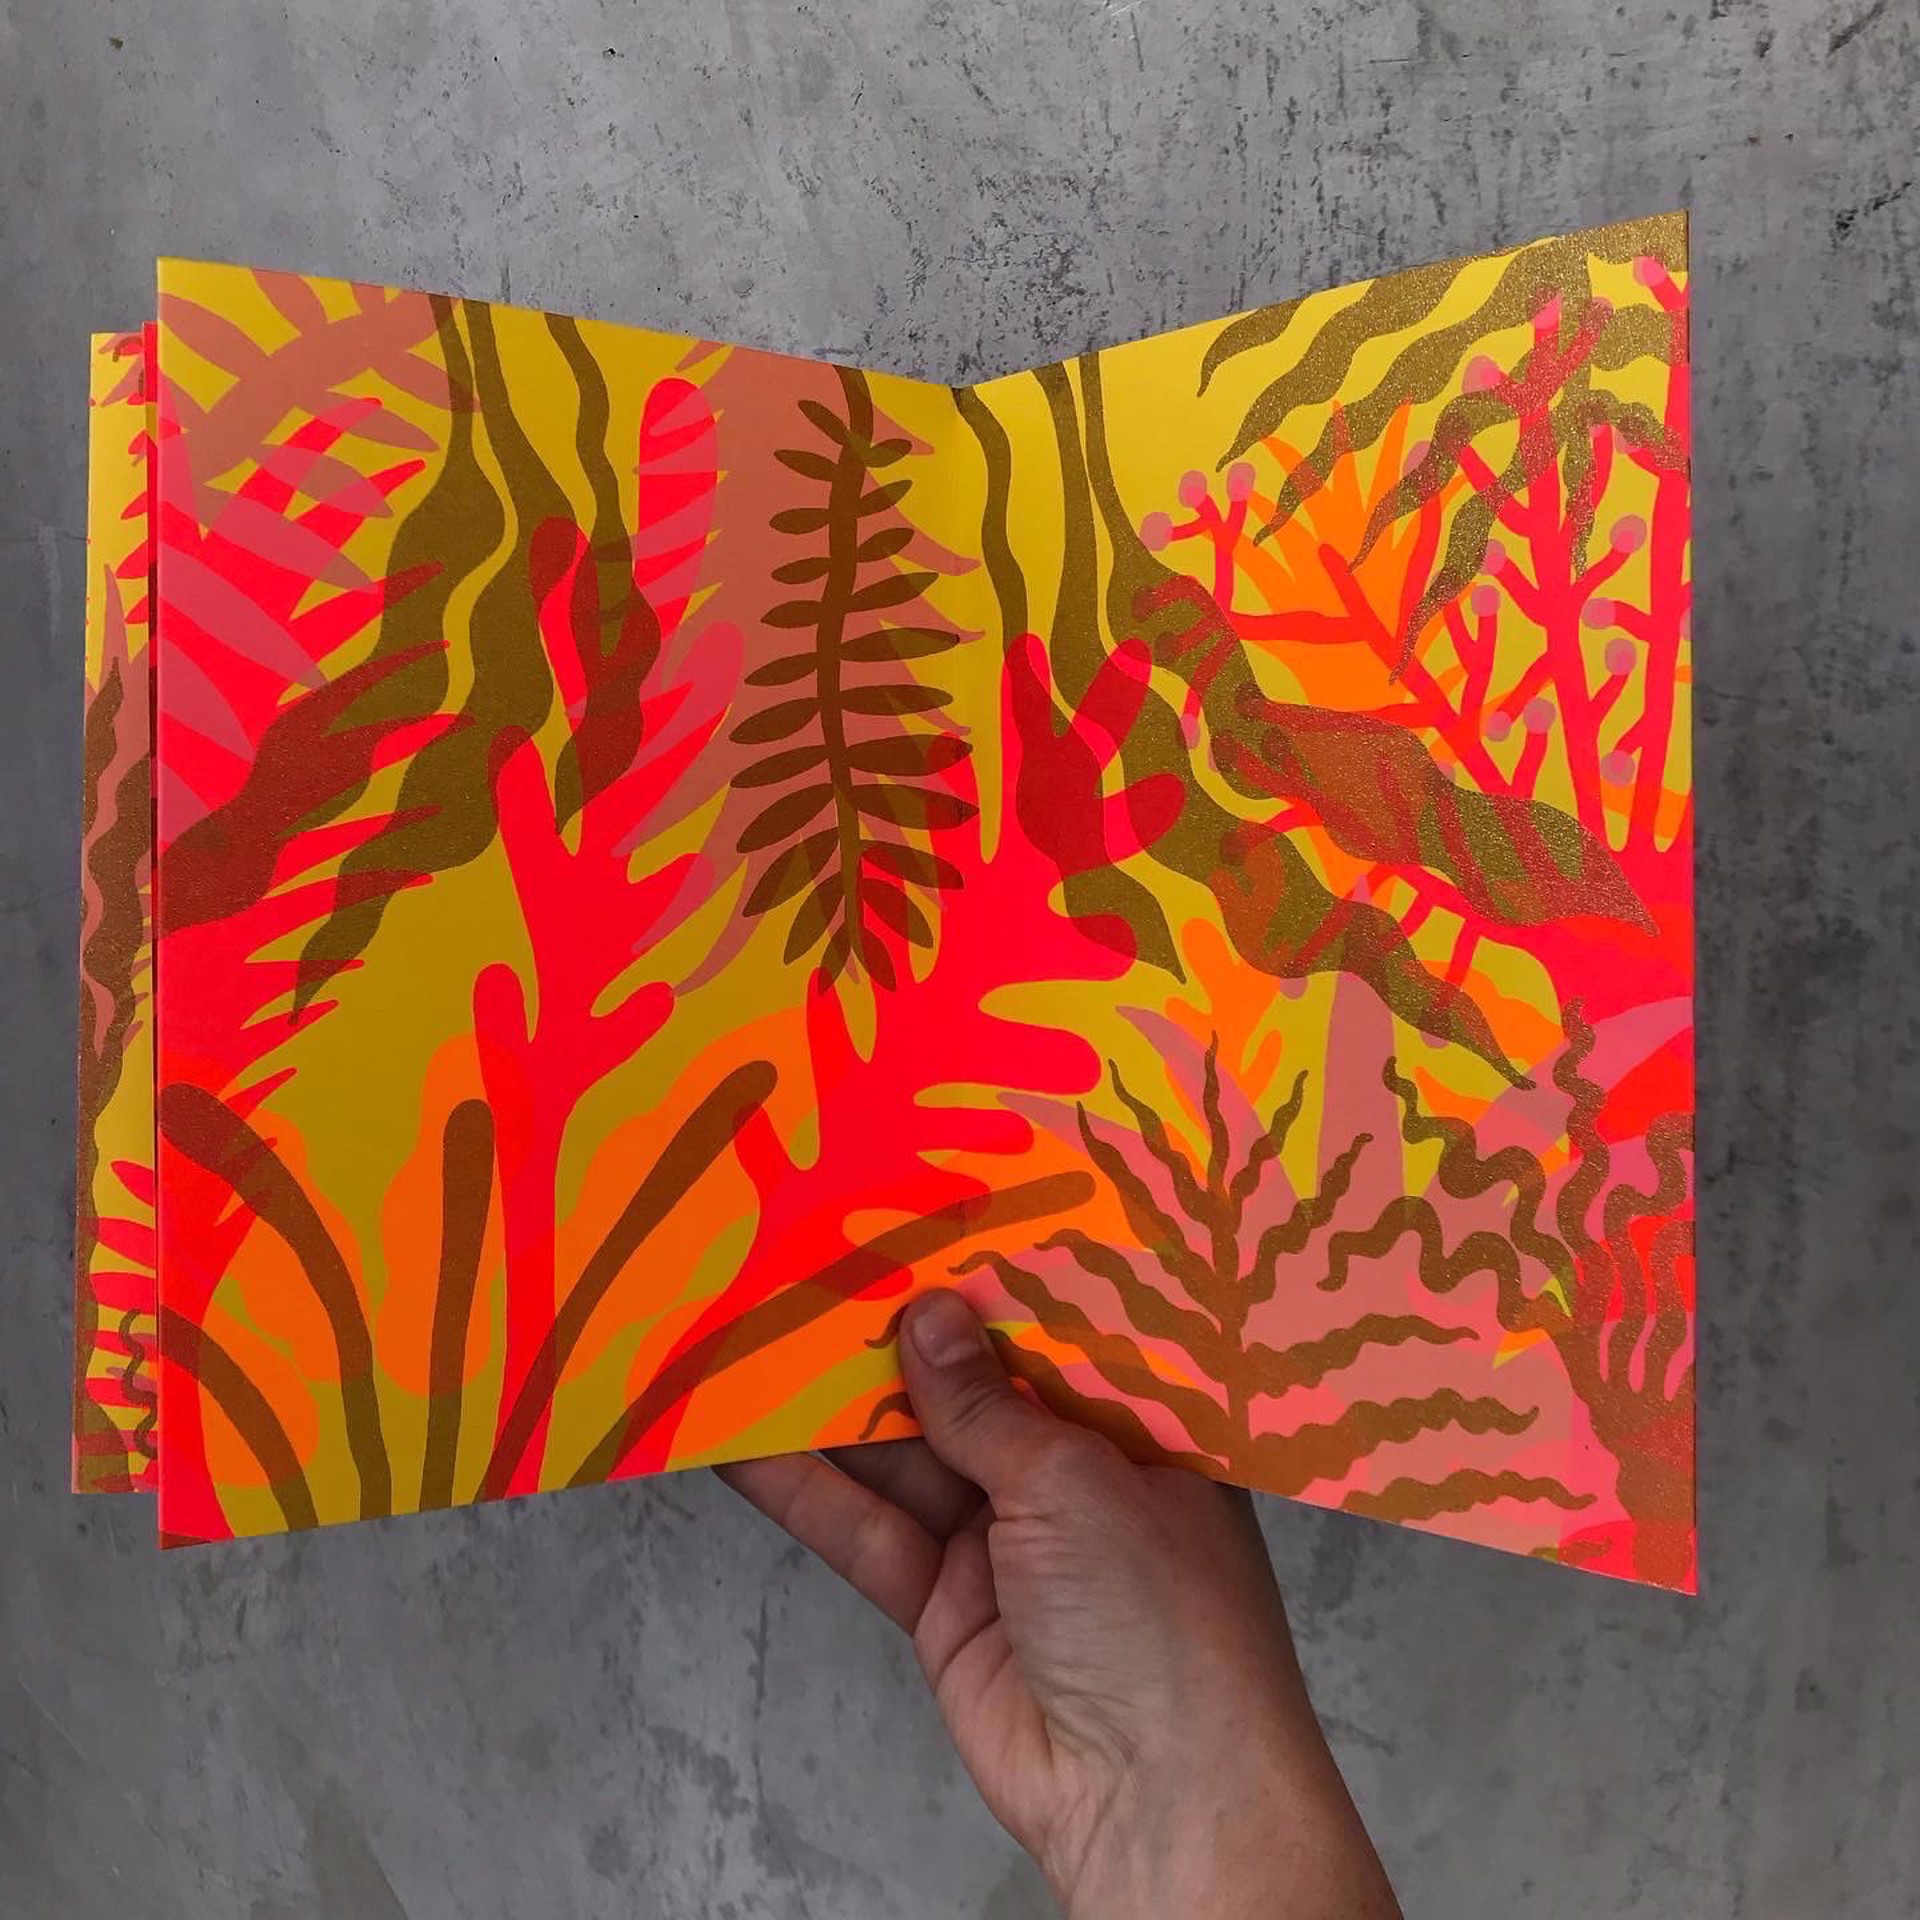 Bosque Tropical (2nd Edition) by Polvoh Press